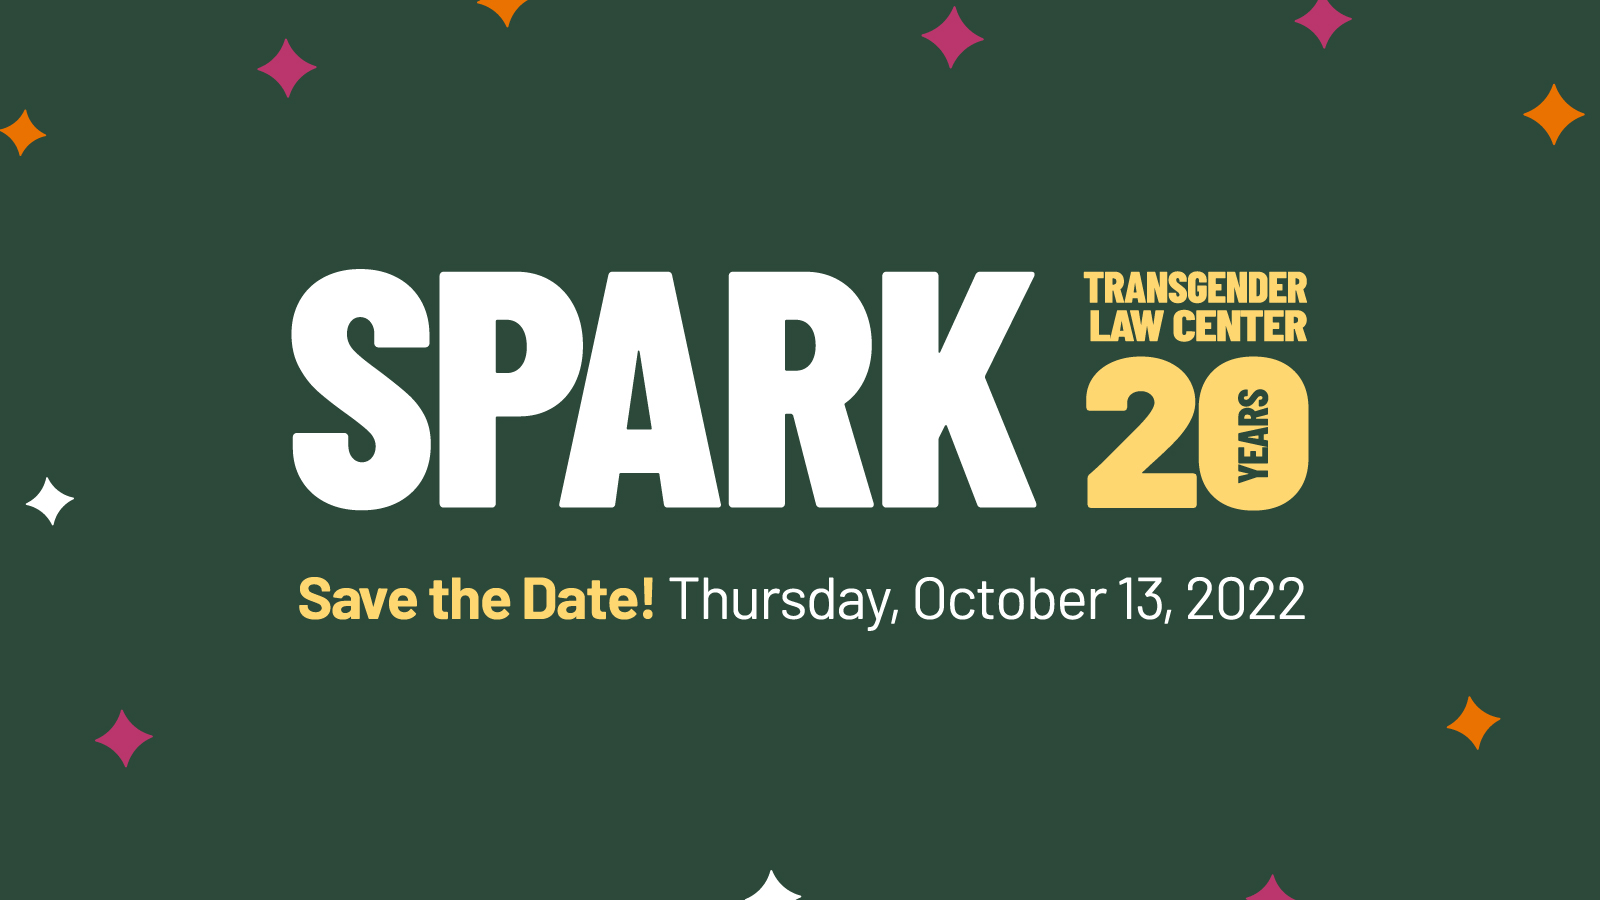 A graphic advertising the 20th anniversary event of Transgender Law Center's SPARK event. Save the Date of Thursday, October 13, 2022